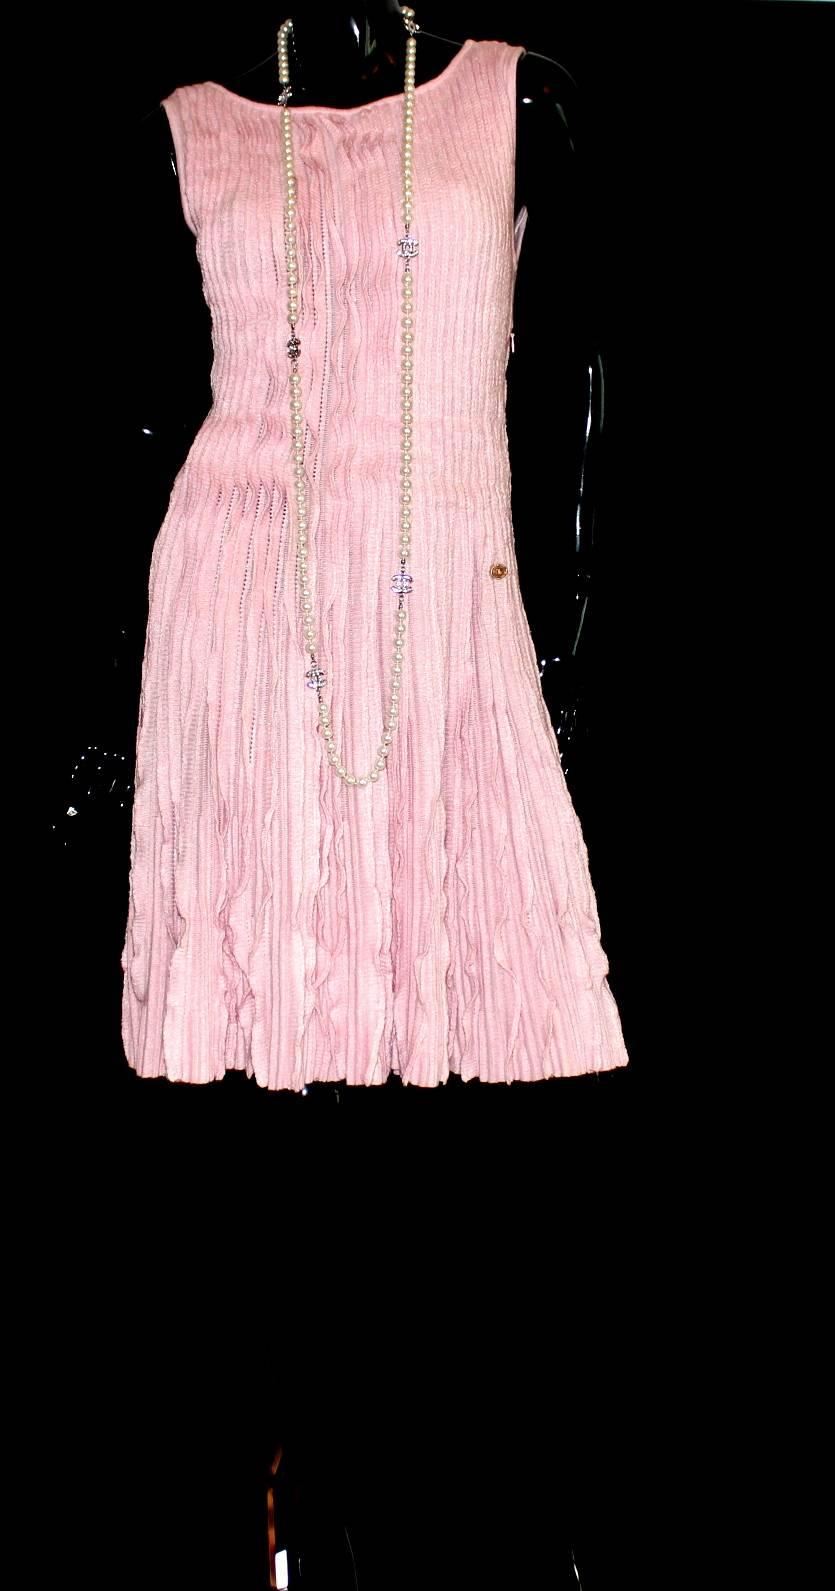 A beautiful Chanel dress 
Candy pink color with a ruffle body, zip up side, the piece is very constructed around the waist so it really holds you in
Chanel CC logo button sewn in by the waist
A timeless Chanel piece for every season
Brandnew and